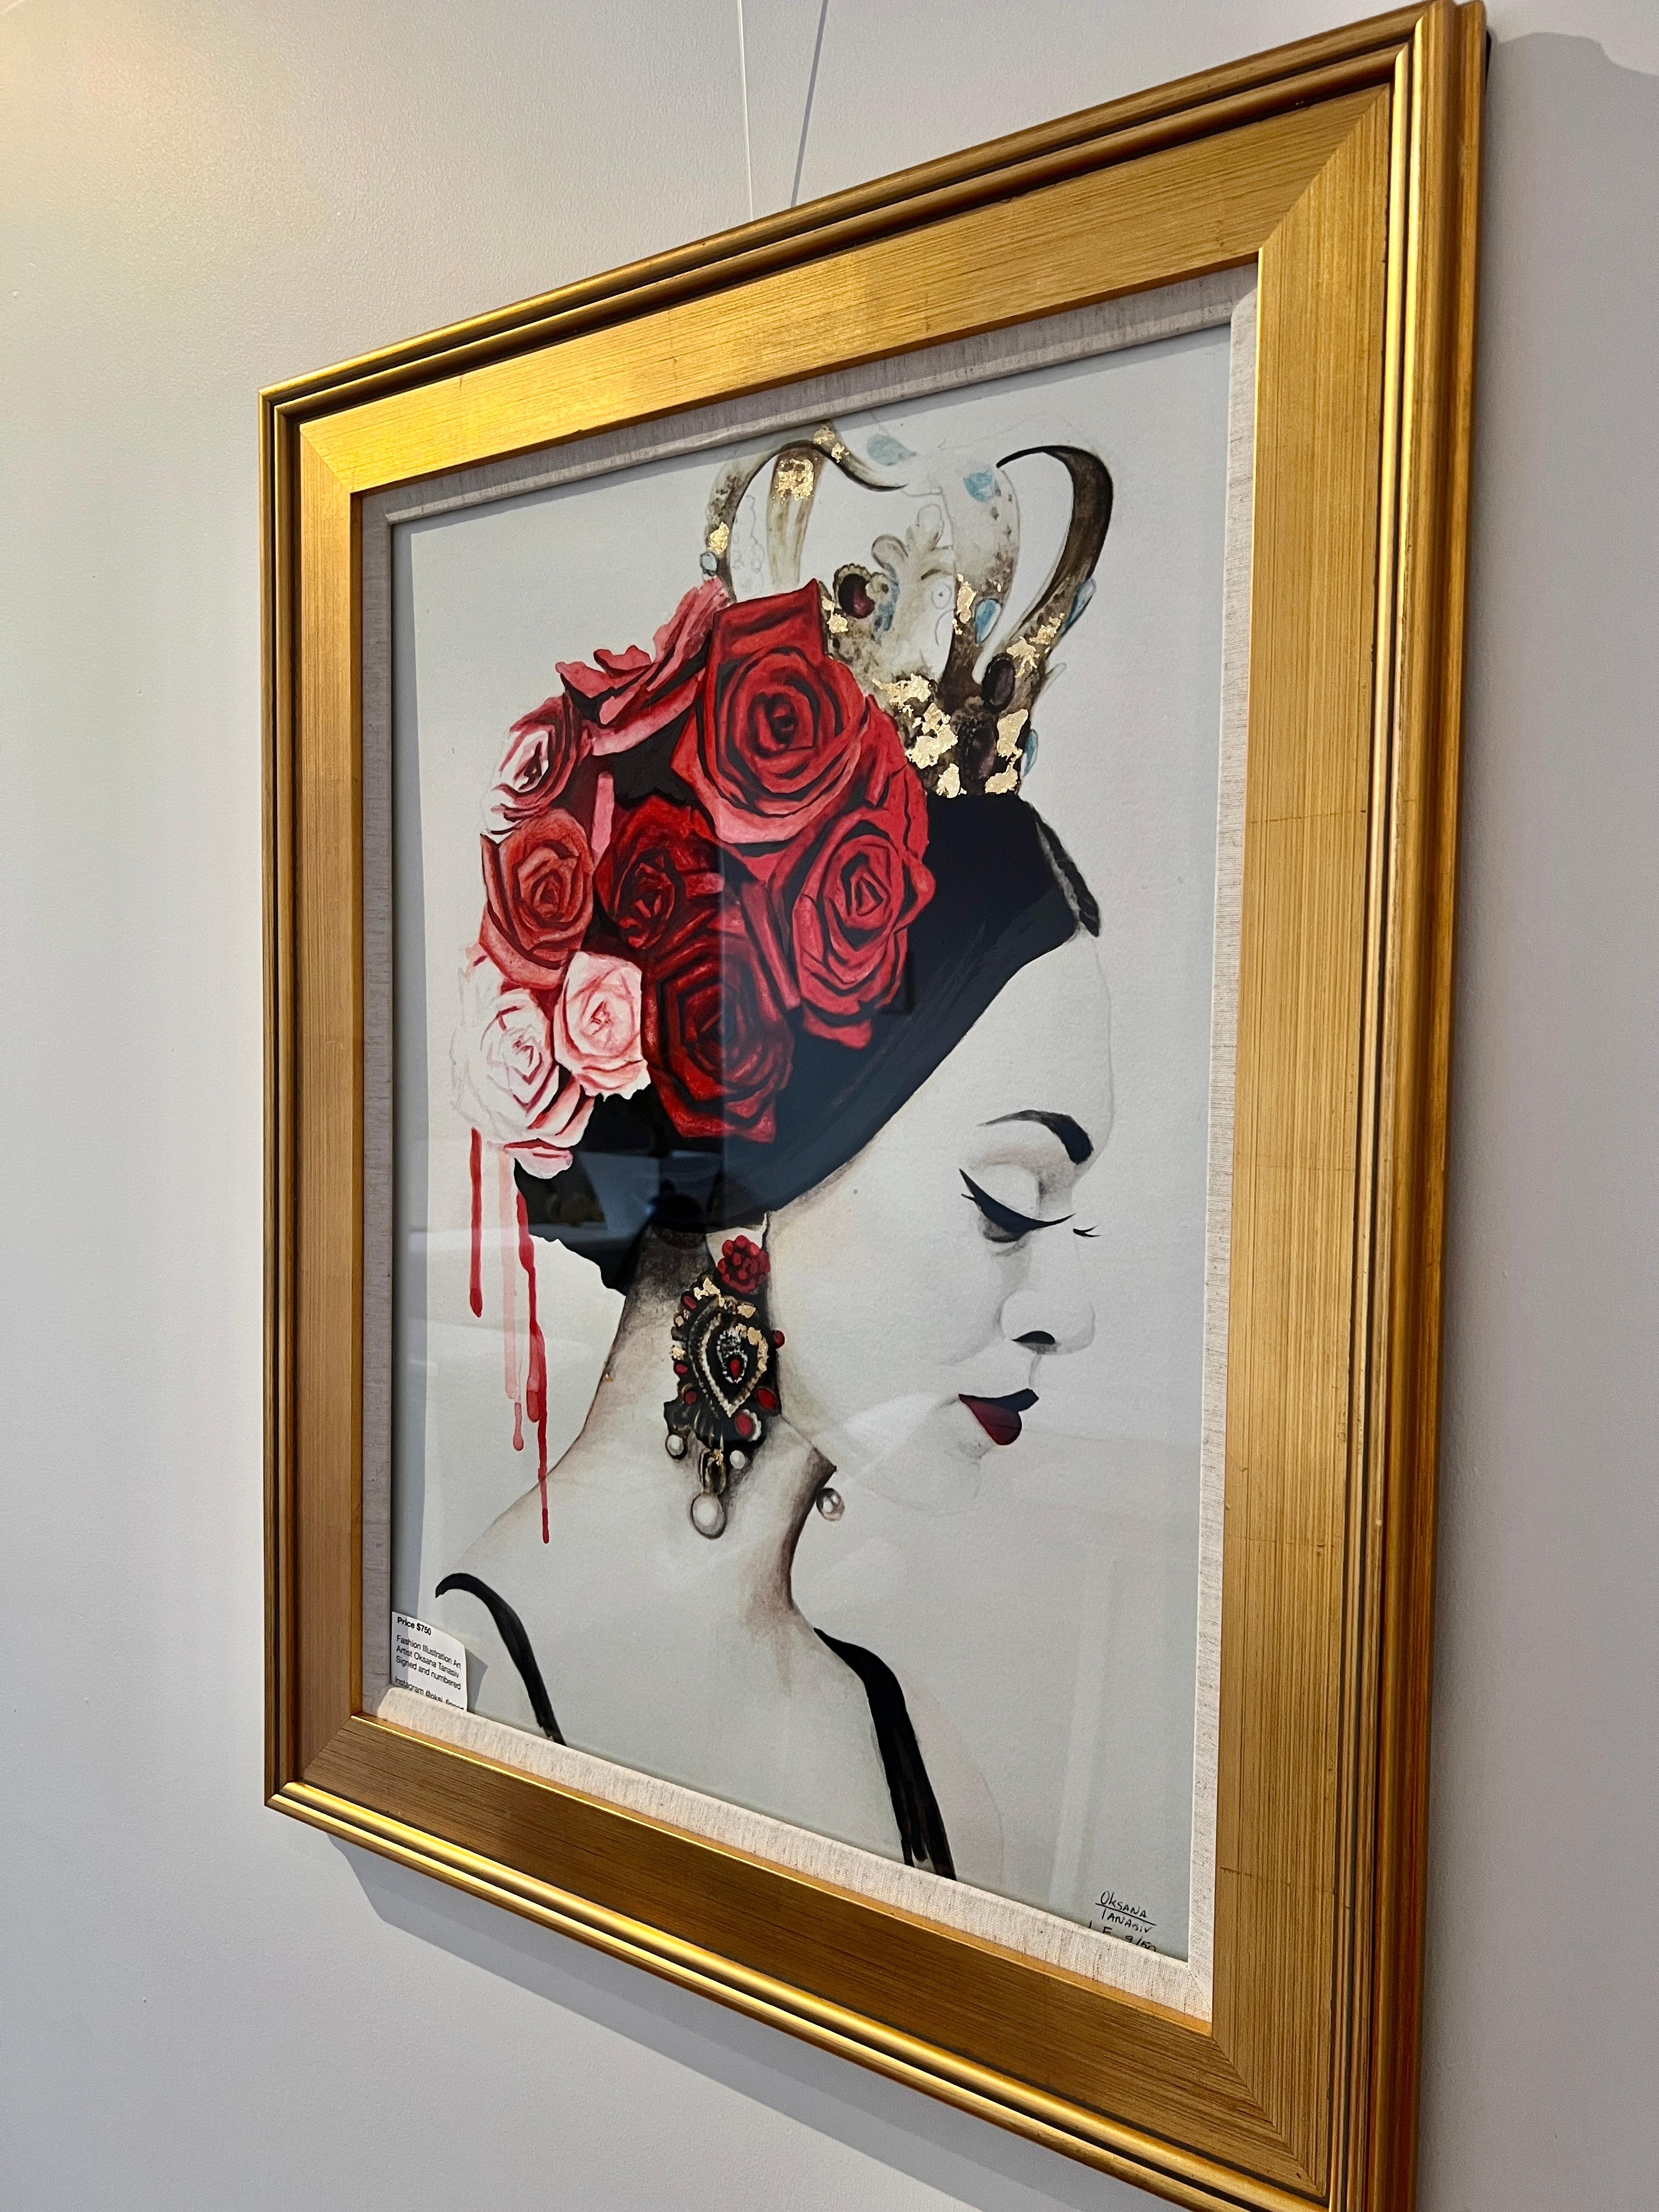 Limited Edition Geclee Print Edition of 50 on watercolor paper,  hand-embellished by watercolor, crown , earrring is hand-embellished by gold leaf.
The print is meticulously created using archival materials and cutting-edge print technology,